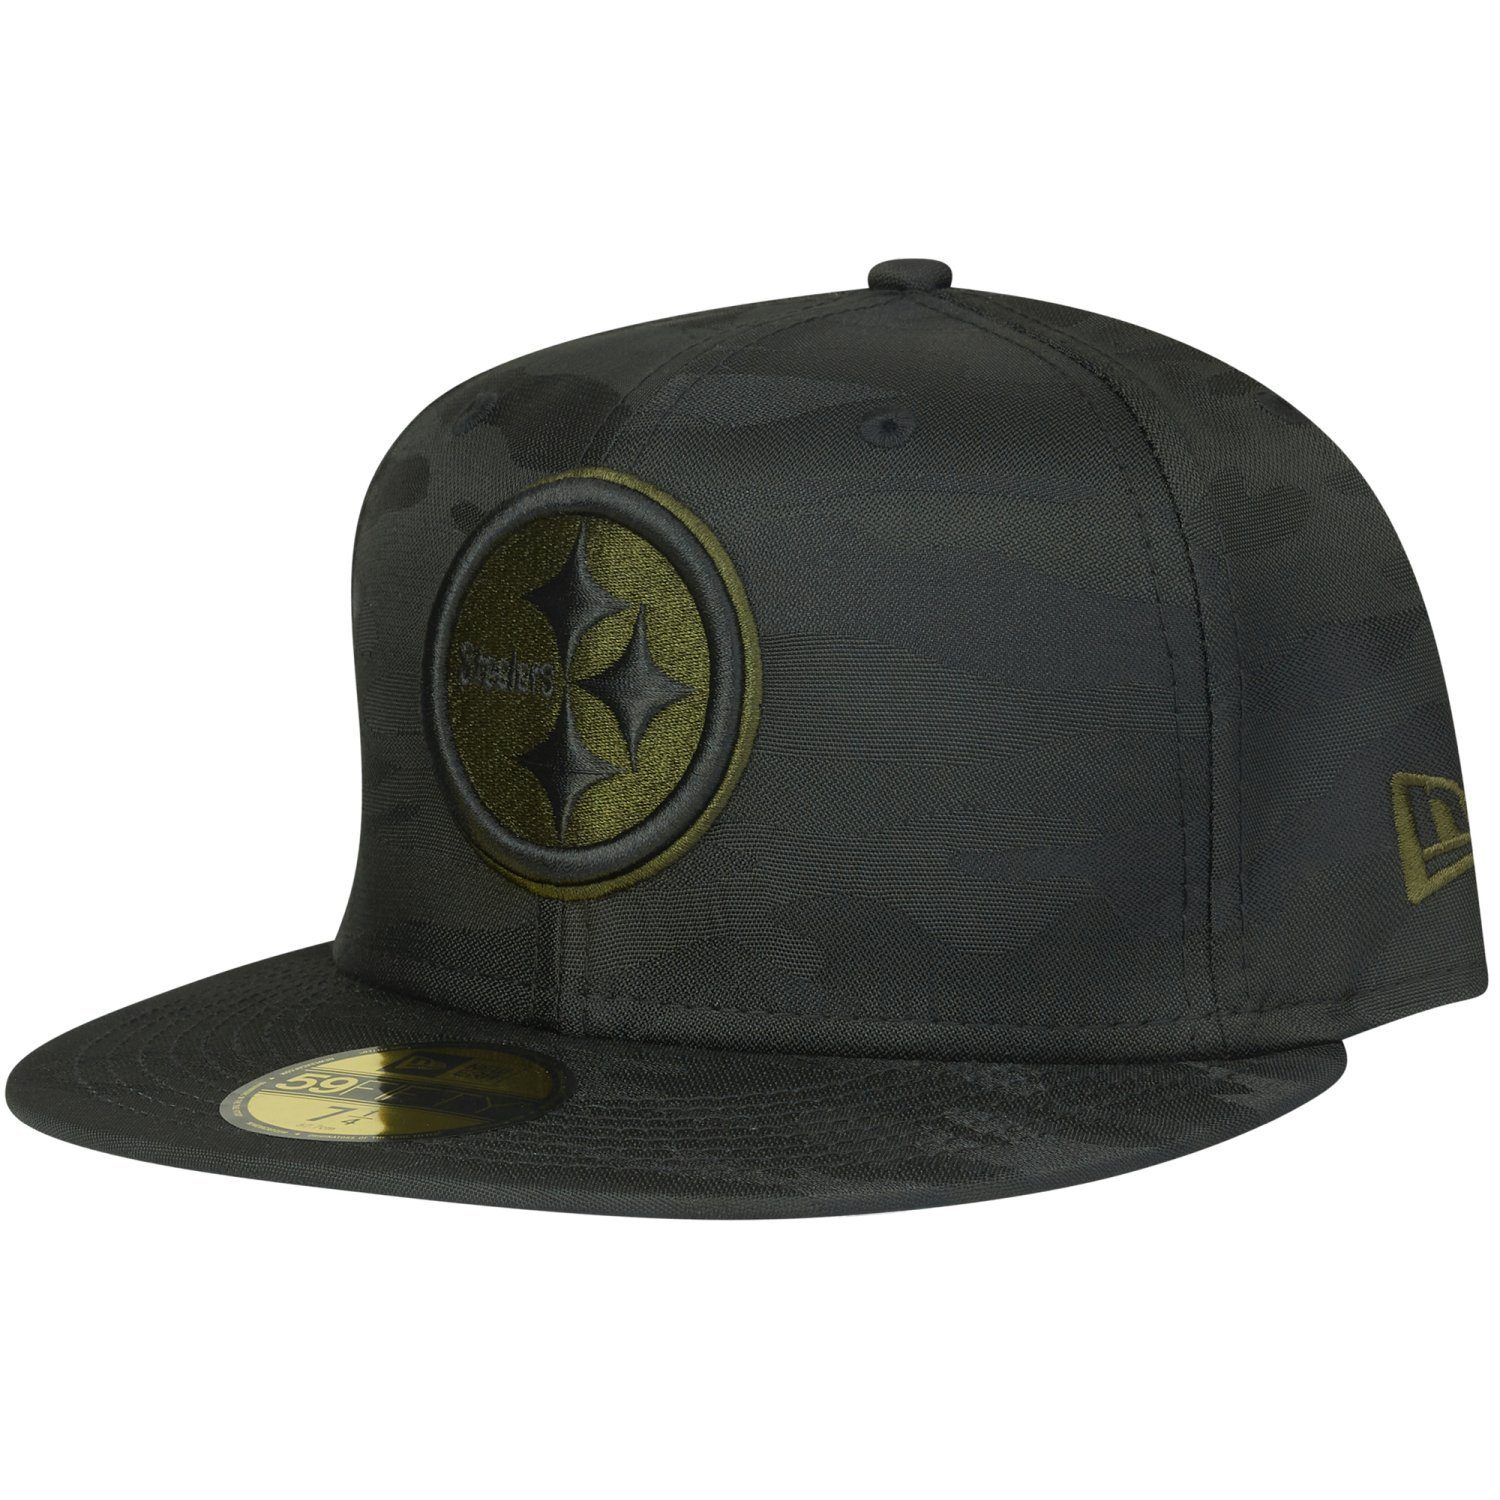 New Era Fitted Cap 59Fifty NFL TEAMS alpine Pittsburgh Steelers